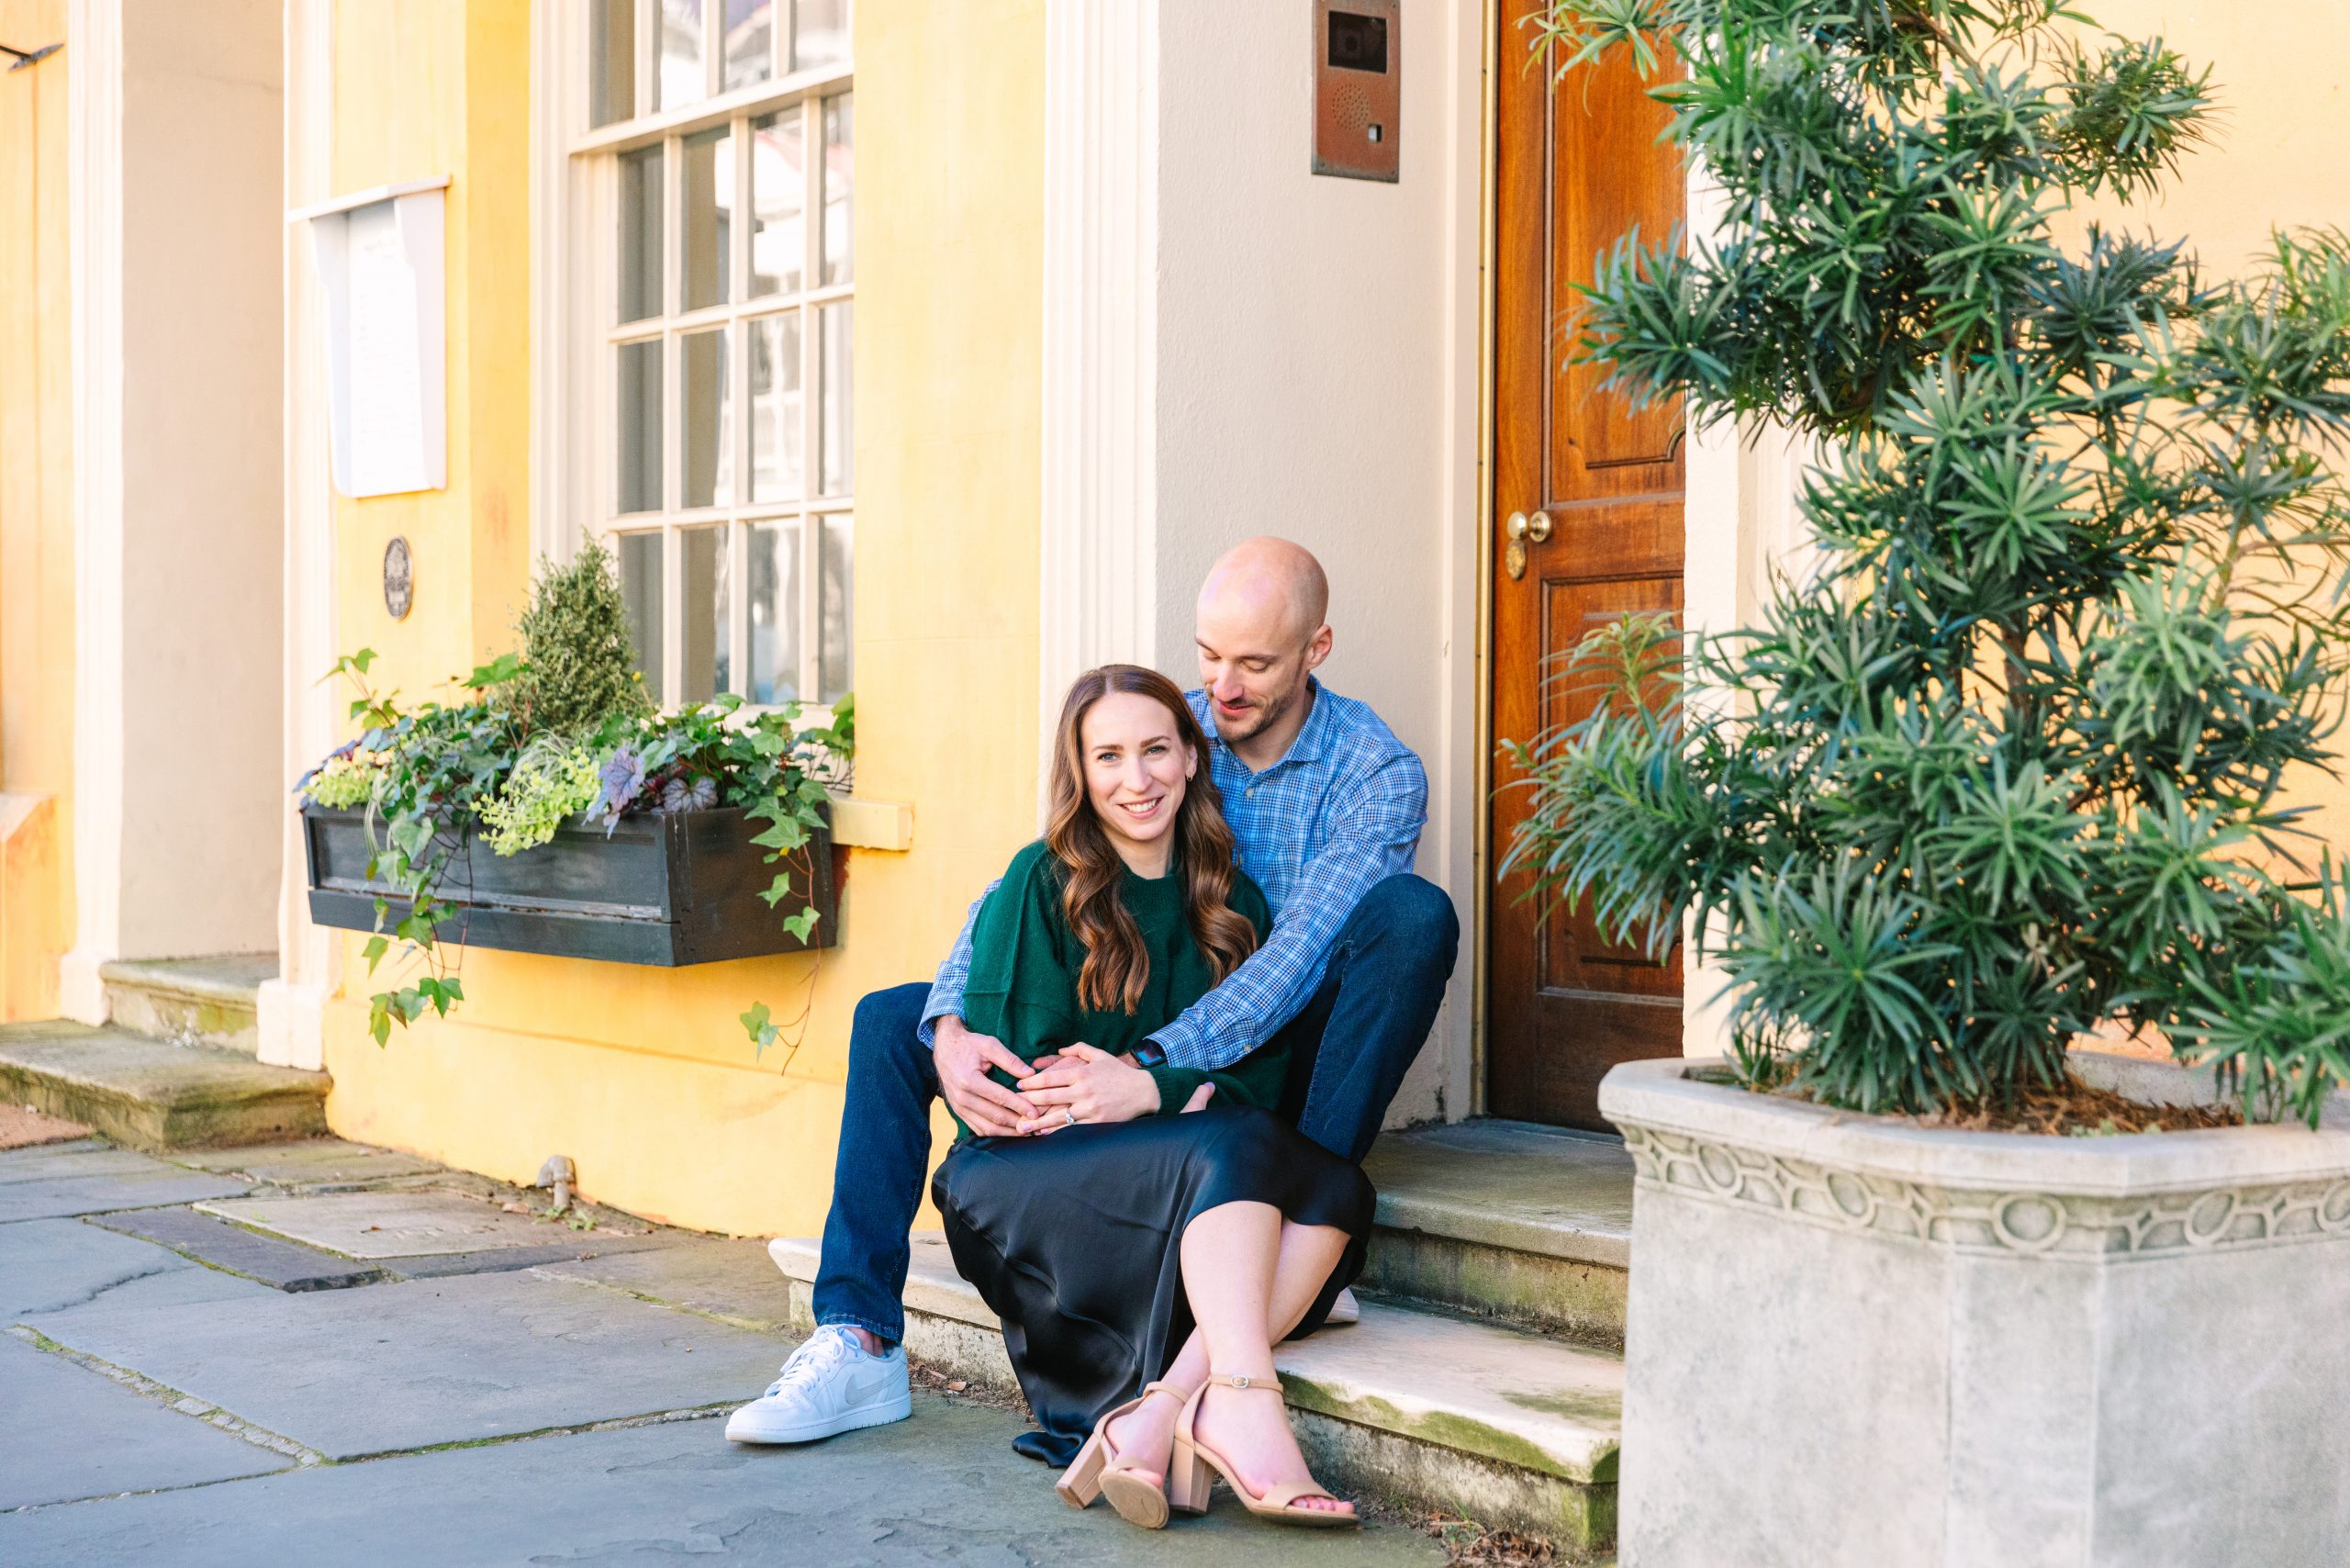 downtown charleston winter engagement session